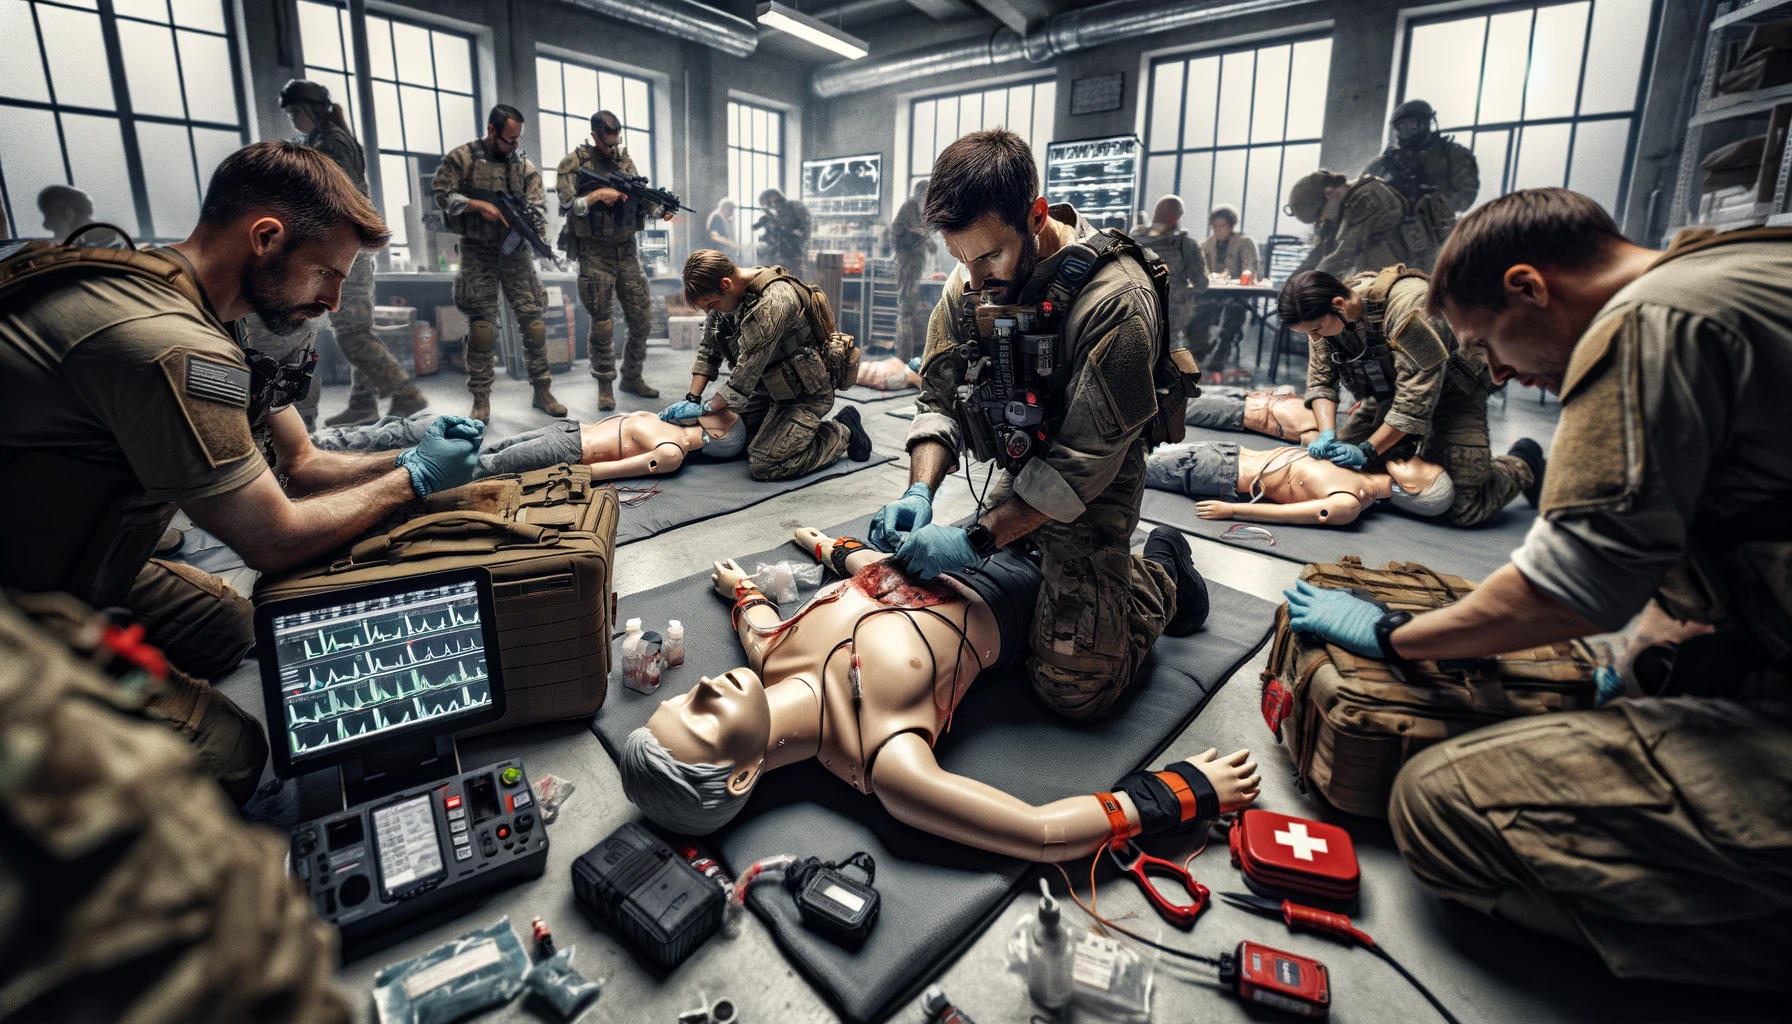 Realistic emergency response training scene with preppers practicing advanced first aid techniques, including CPR, applying tourniquets, and emergency medication administration. Intense focus is evident as instructors provide guidance amidst a backdrop of defibrillators, trauma bags, and medical kits, highlighting the critical importance of preparedness and advanced medical skills in saving lives during emergencies